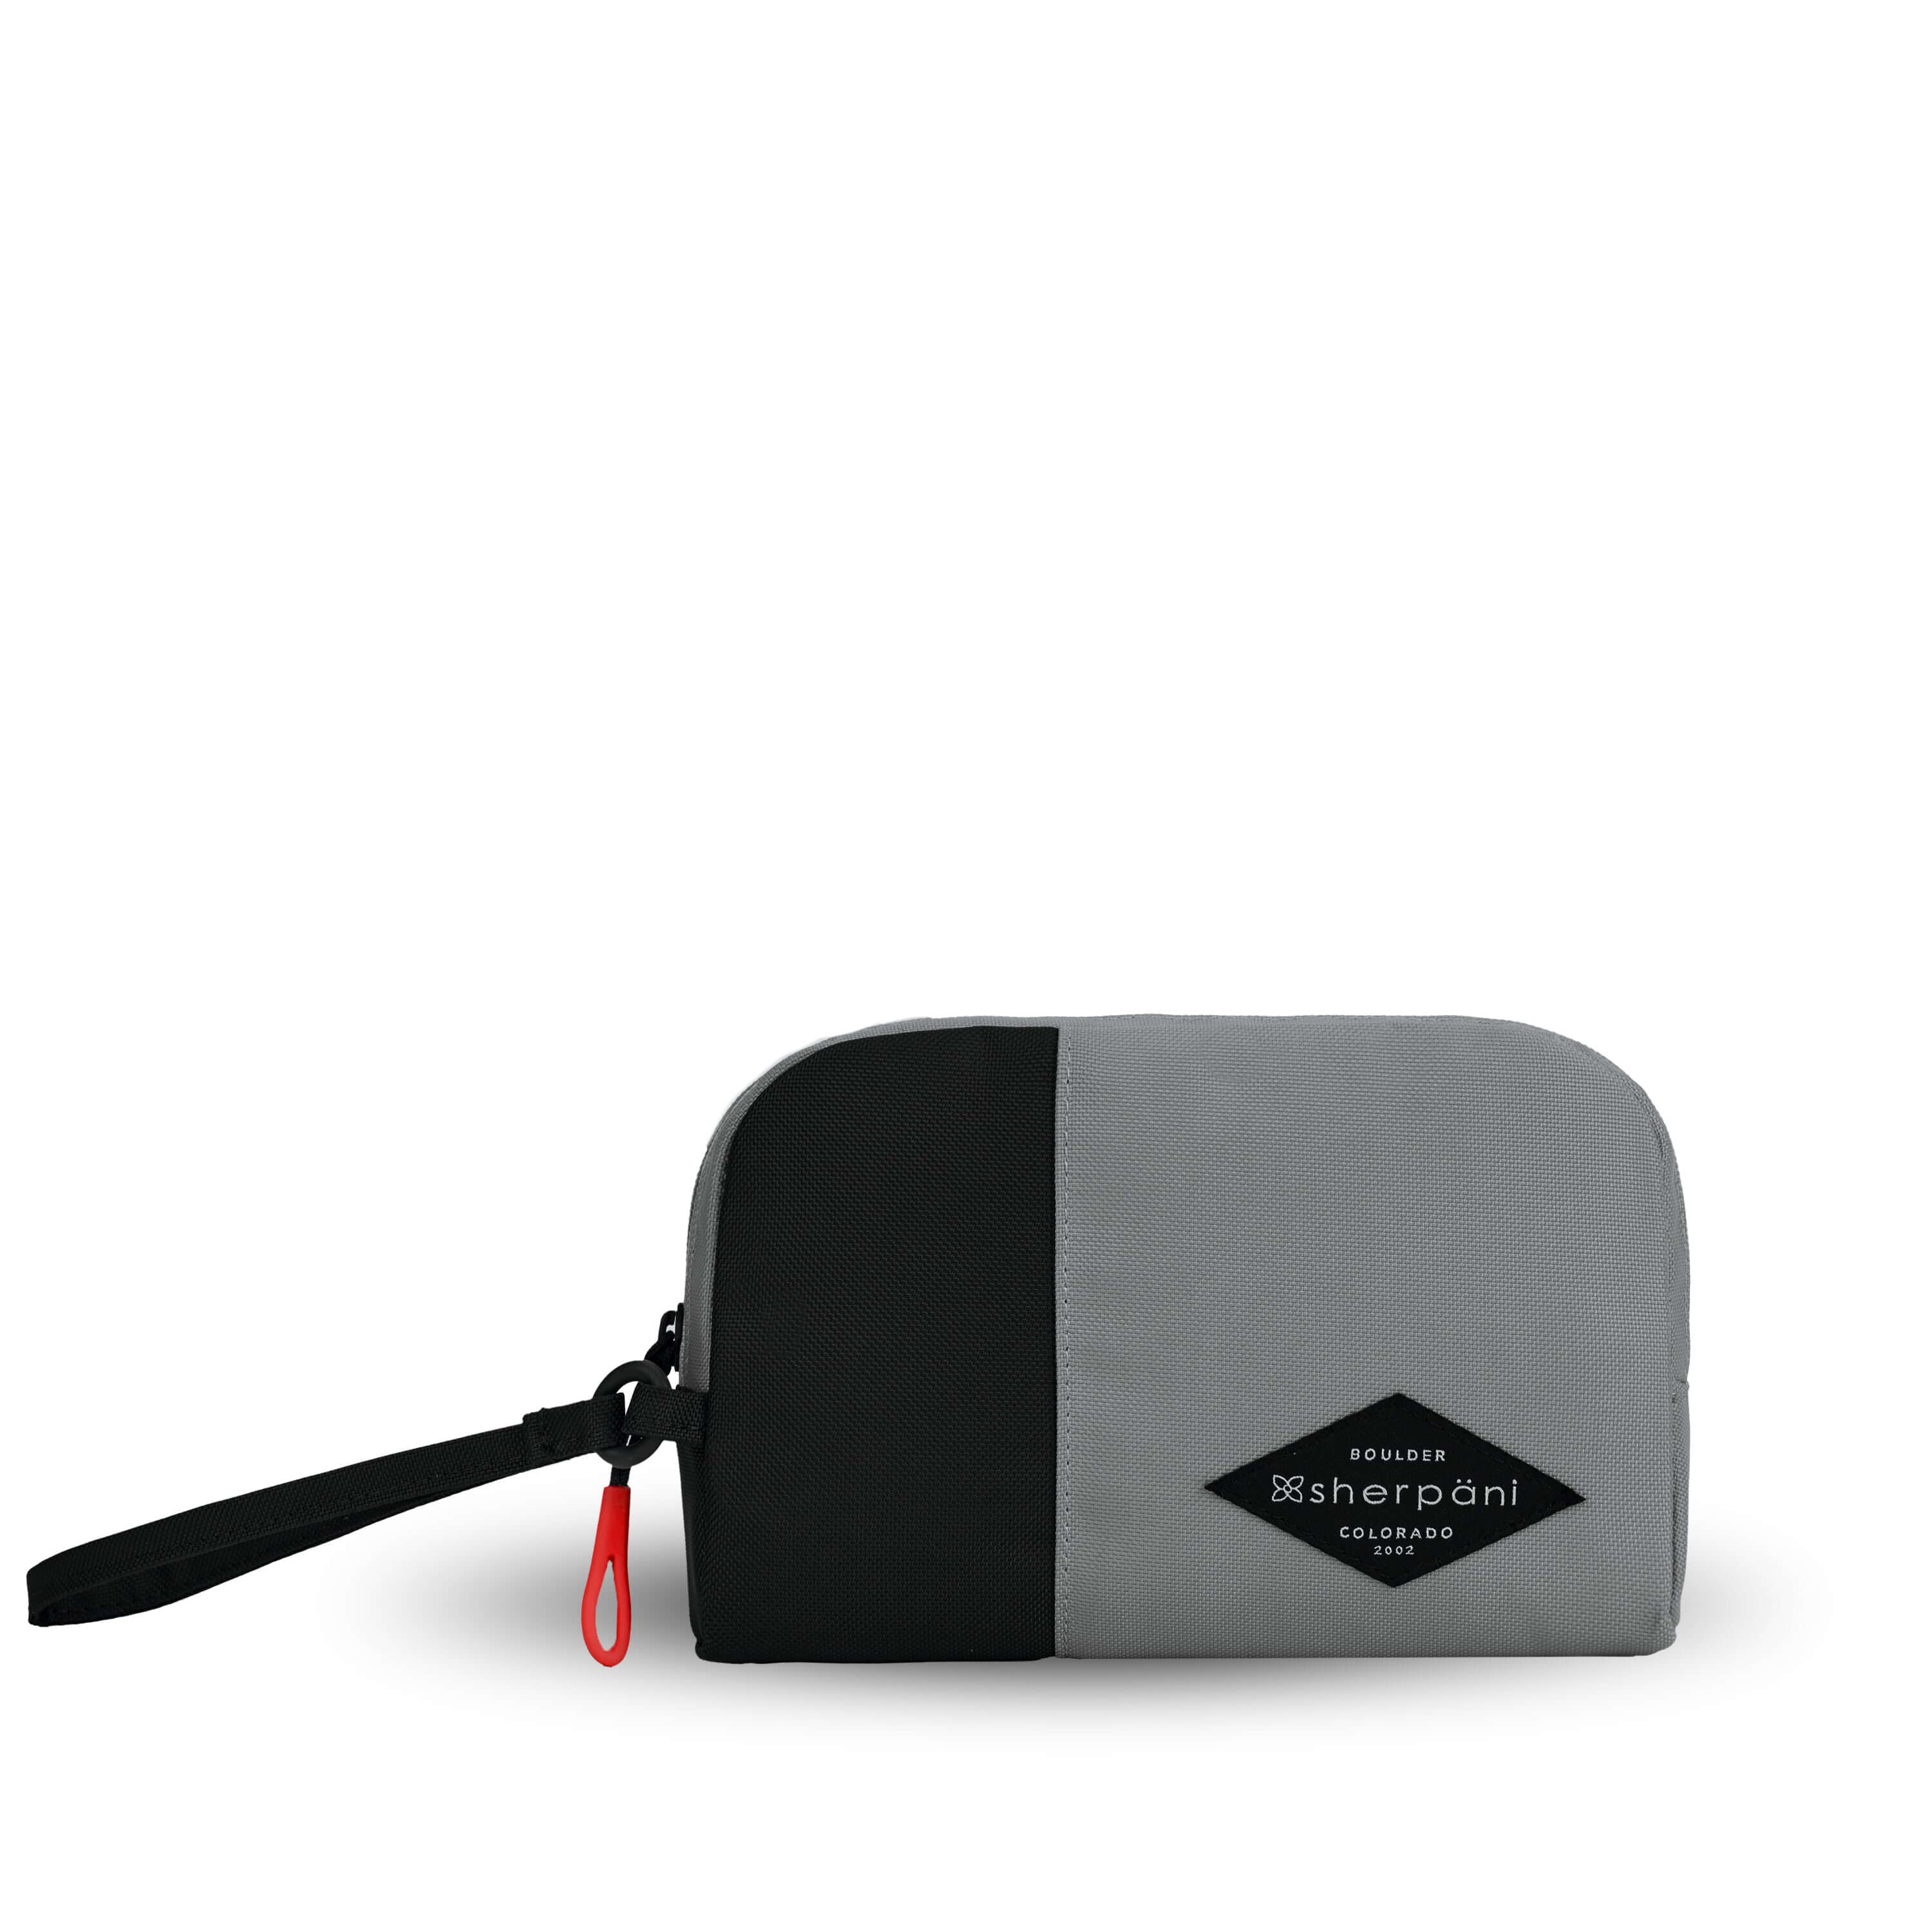 Flat front view of Sherpani travel accessory, the Jolie in Stone, in medium size. The pouch is two-toned in gray and black. It features a black wristlet strap and an easy-pull zipper accented in red. 